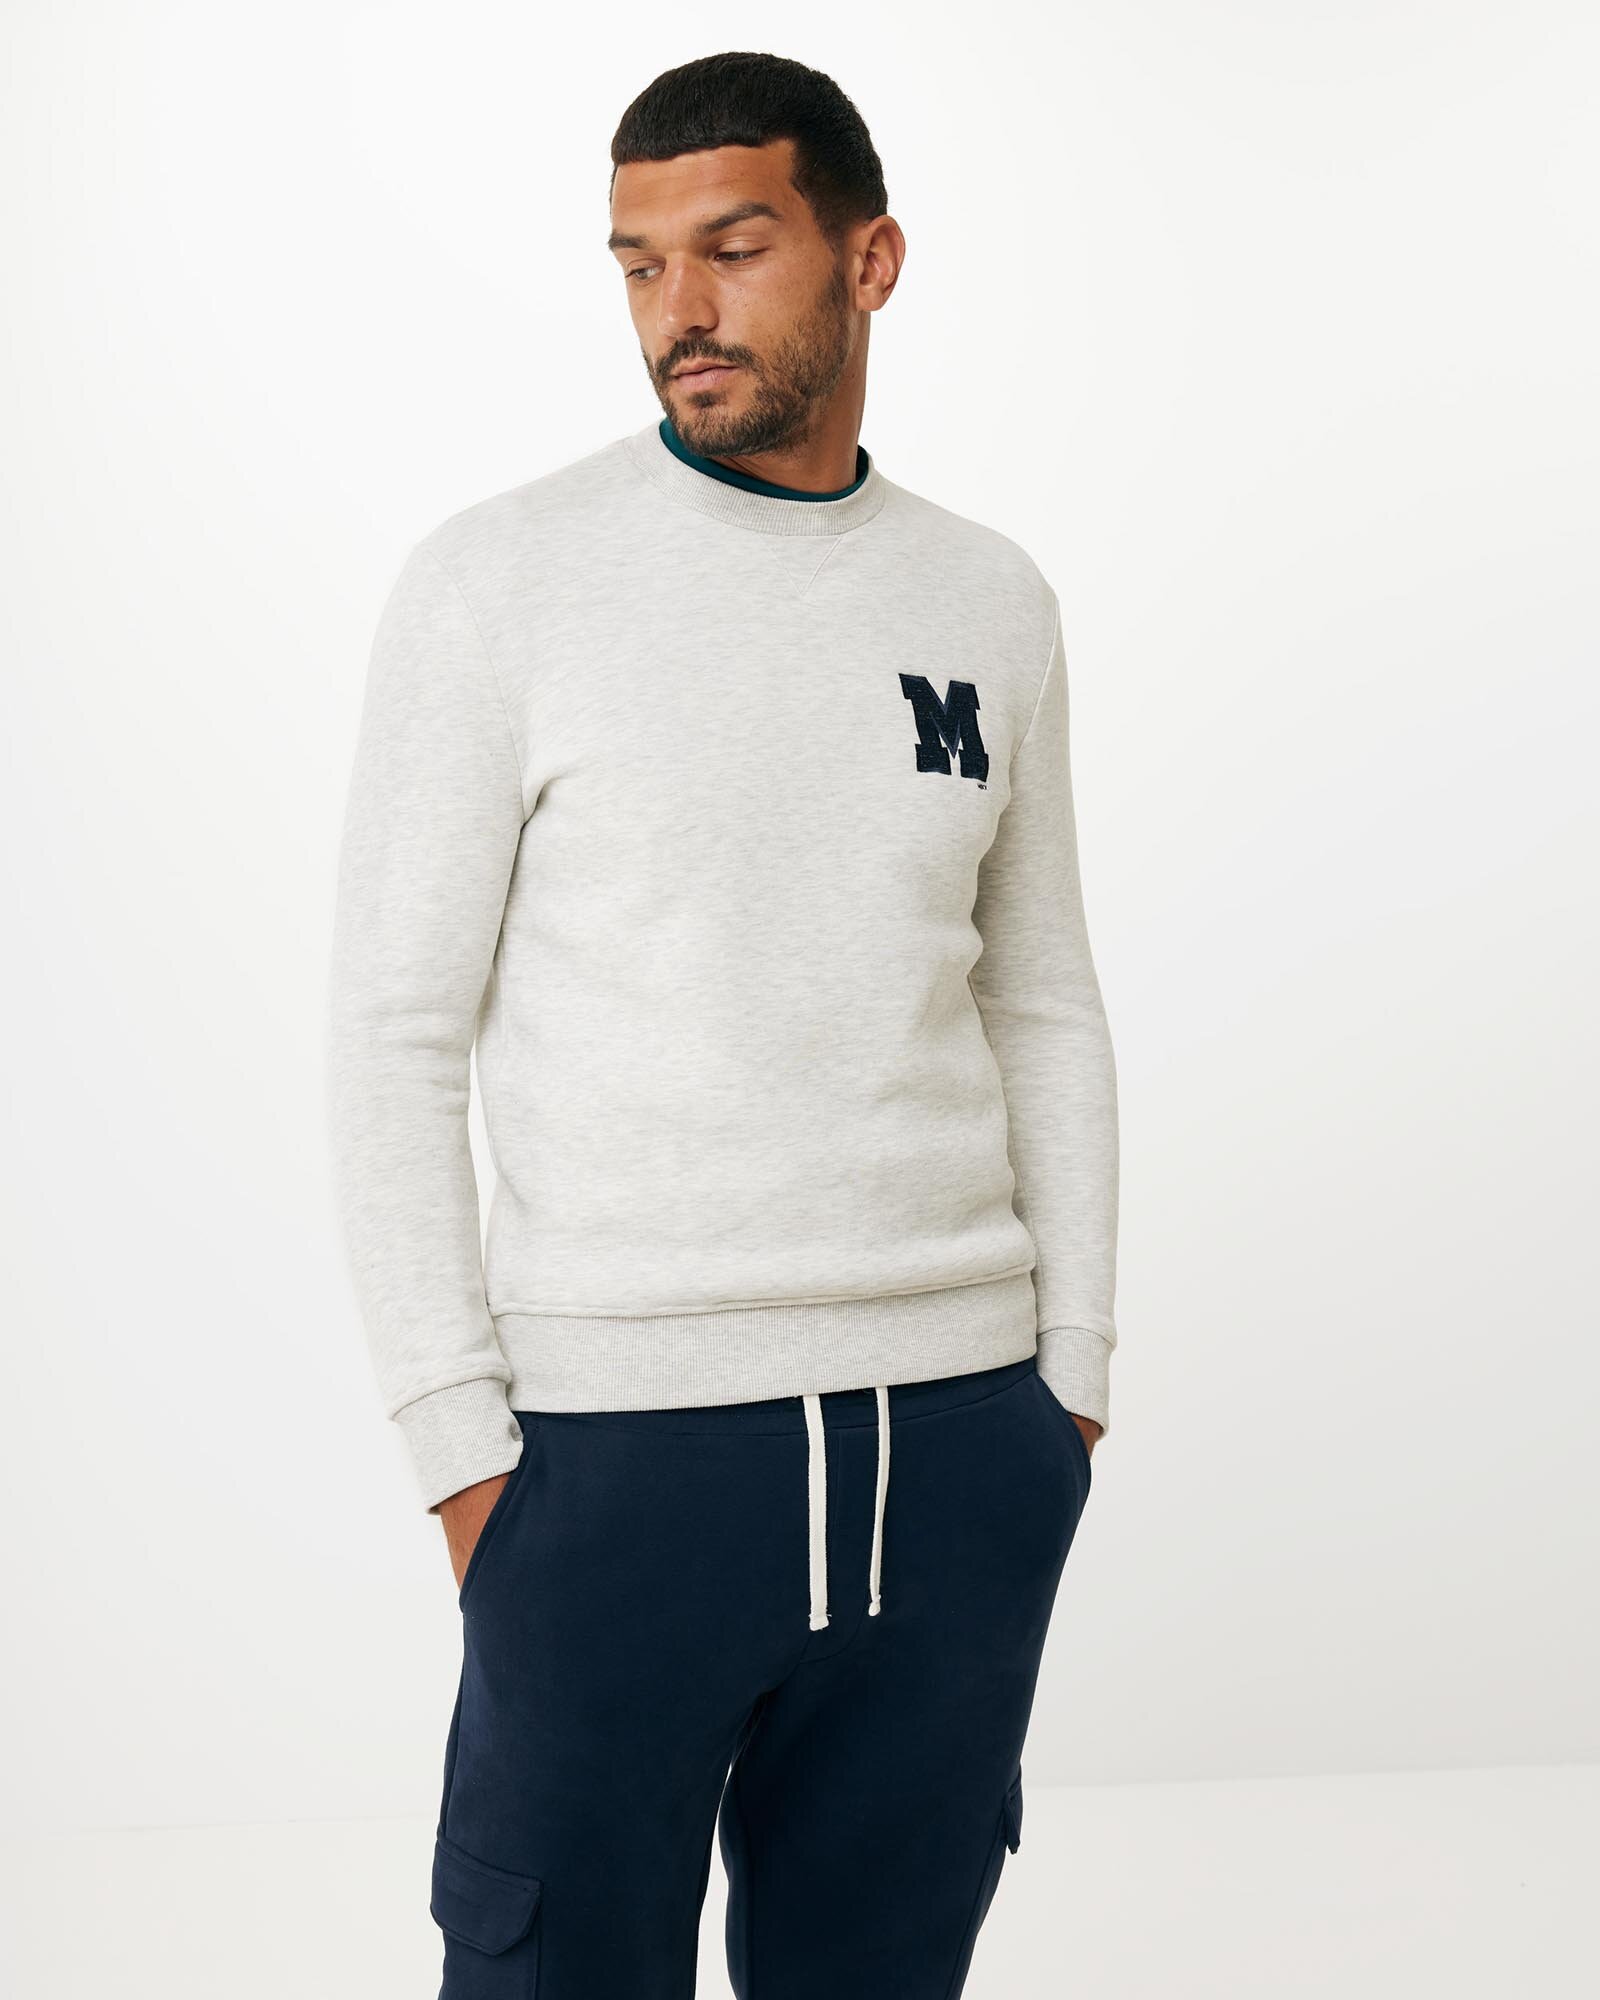 Mexx Crew Neck Sweatshirt With Embroidery Mannen - Off White Melee - Maat M